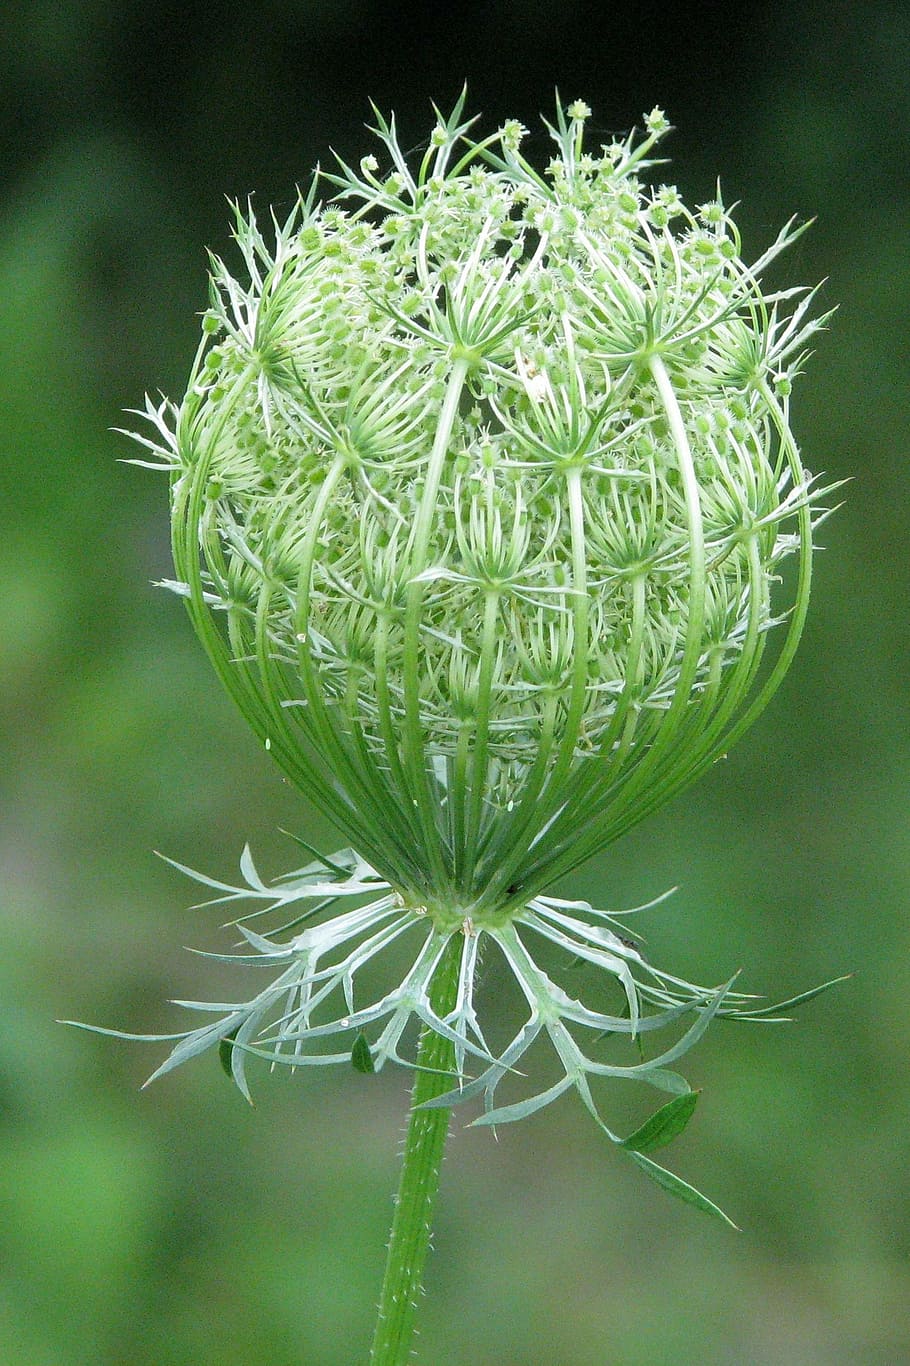 queen anne's lace, wild carrot, daucus carota, unopened flower, moneymore, ontario, canada, plant, green color, beauty in nature